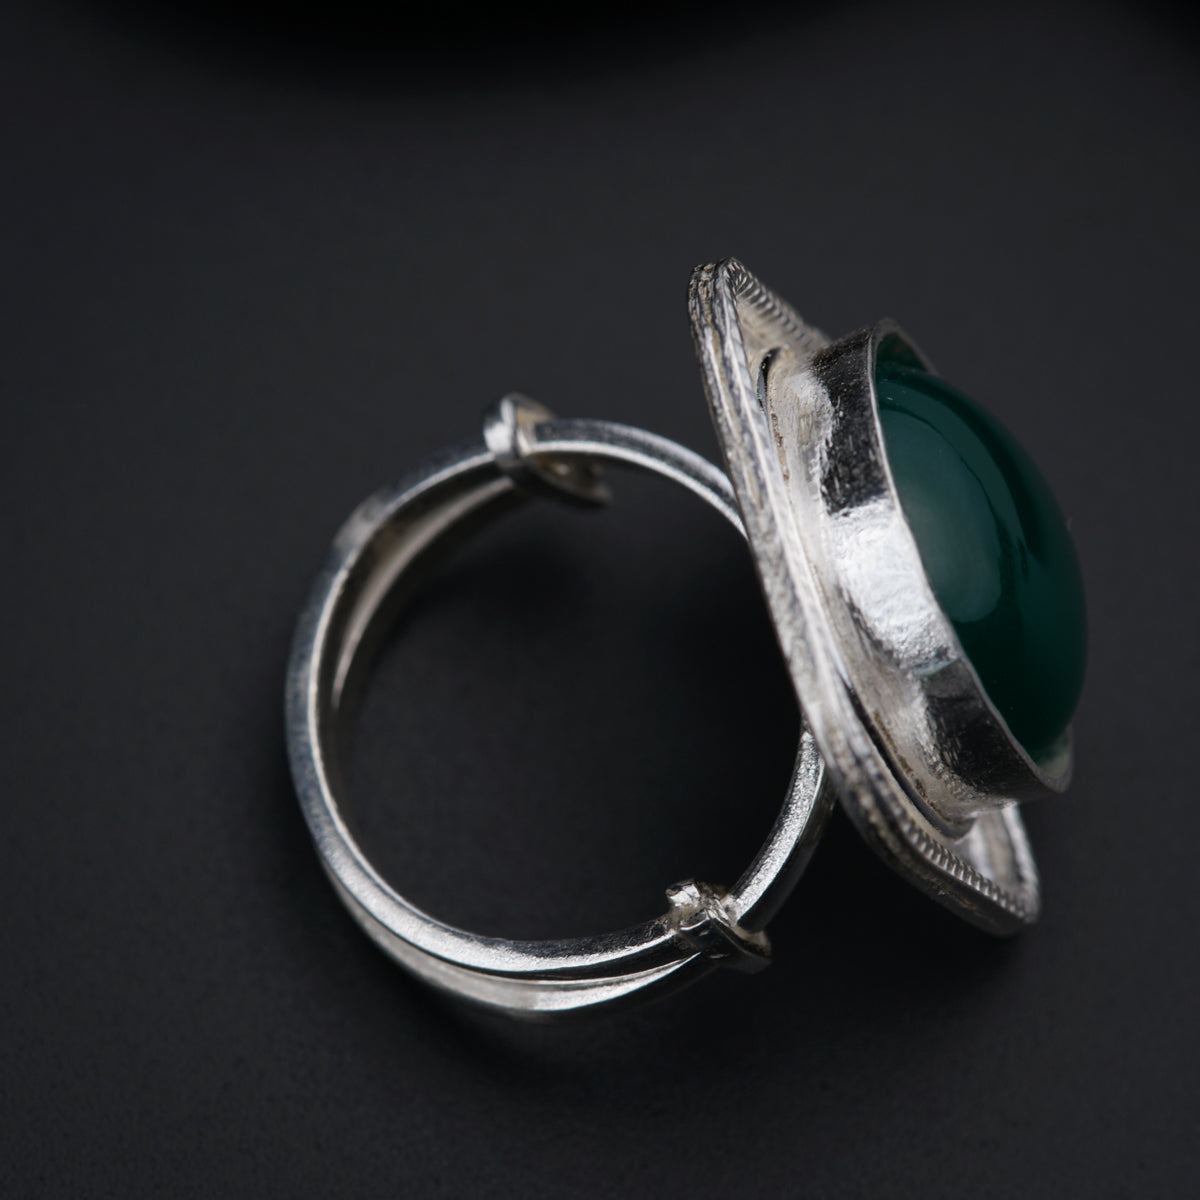 a close up of a ring with a green stone